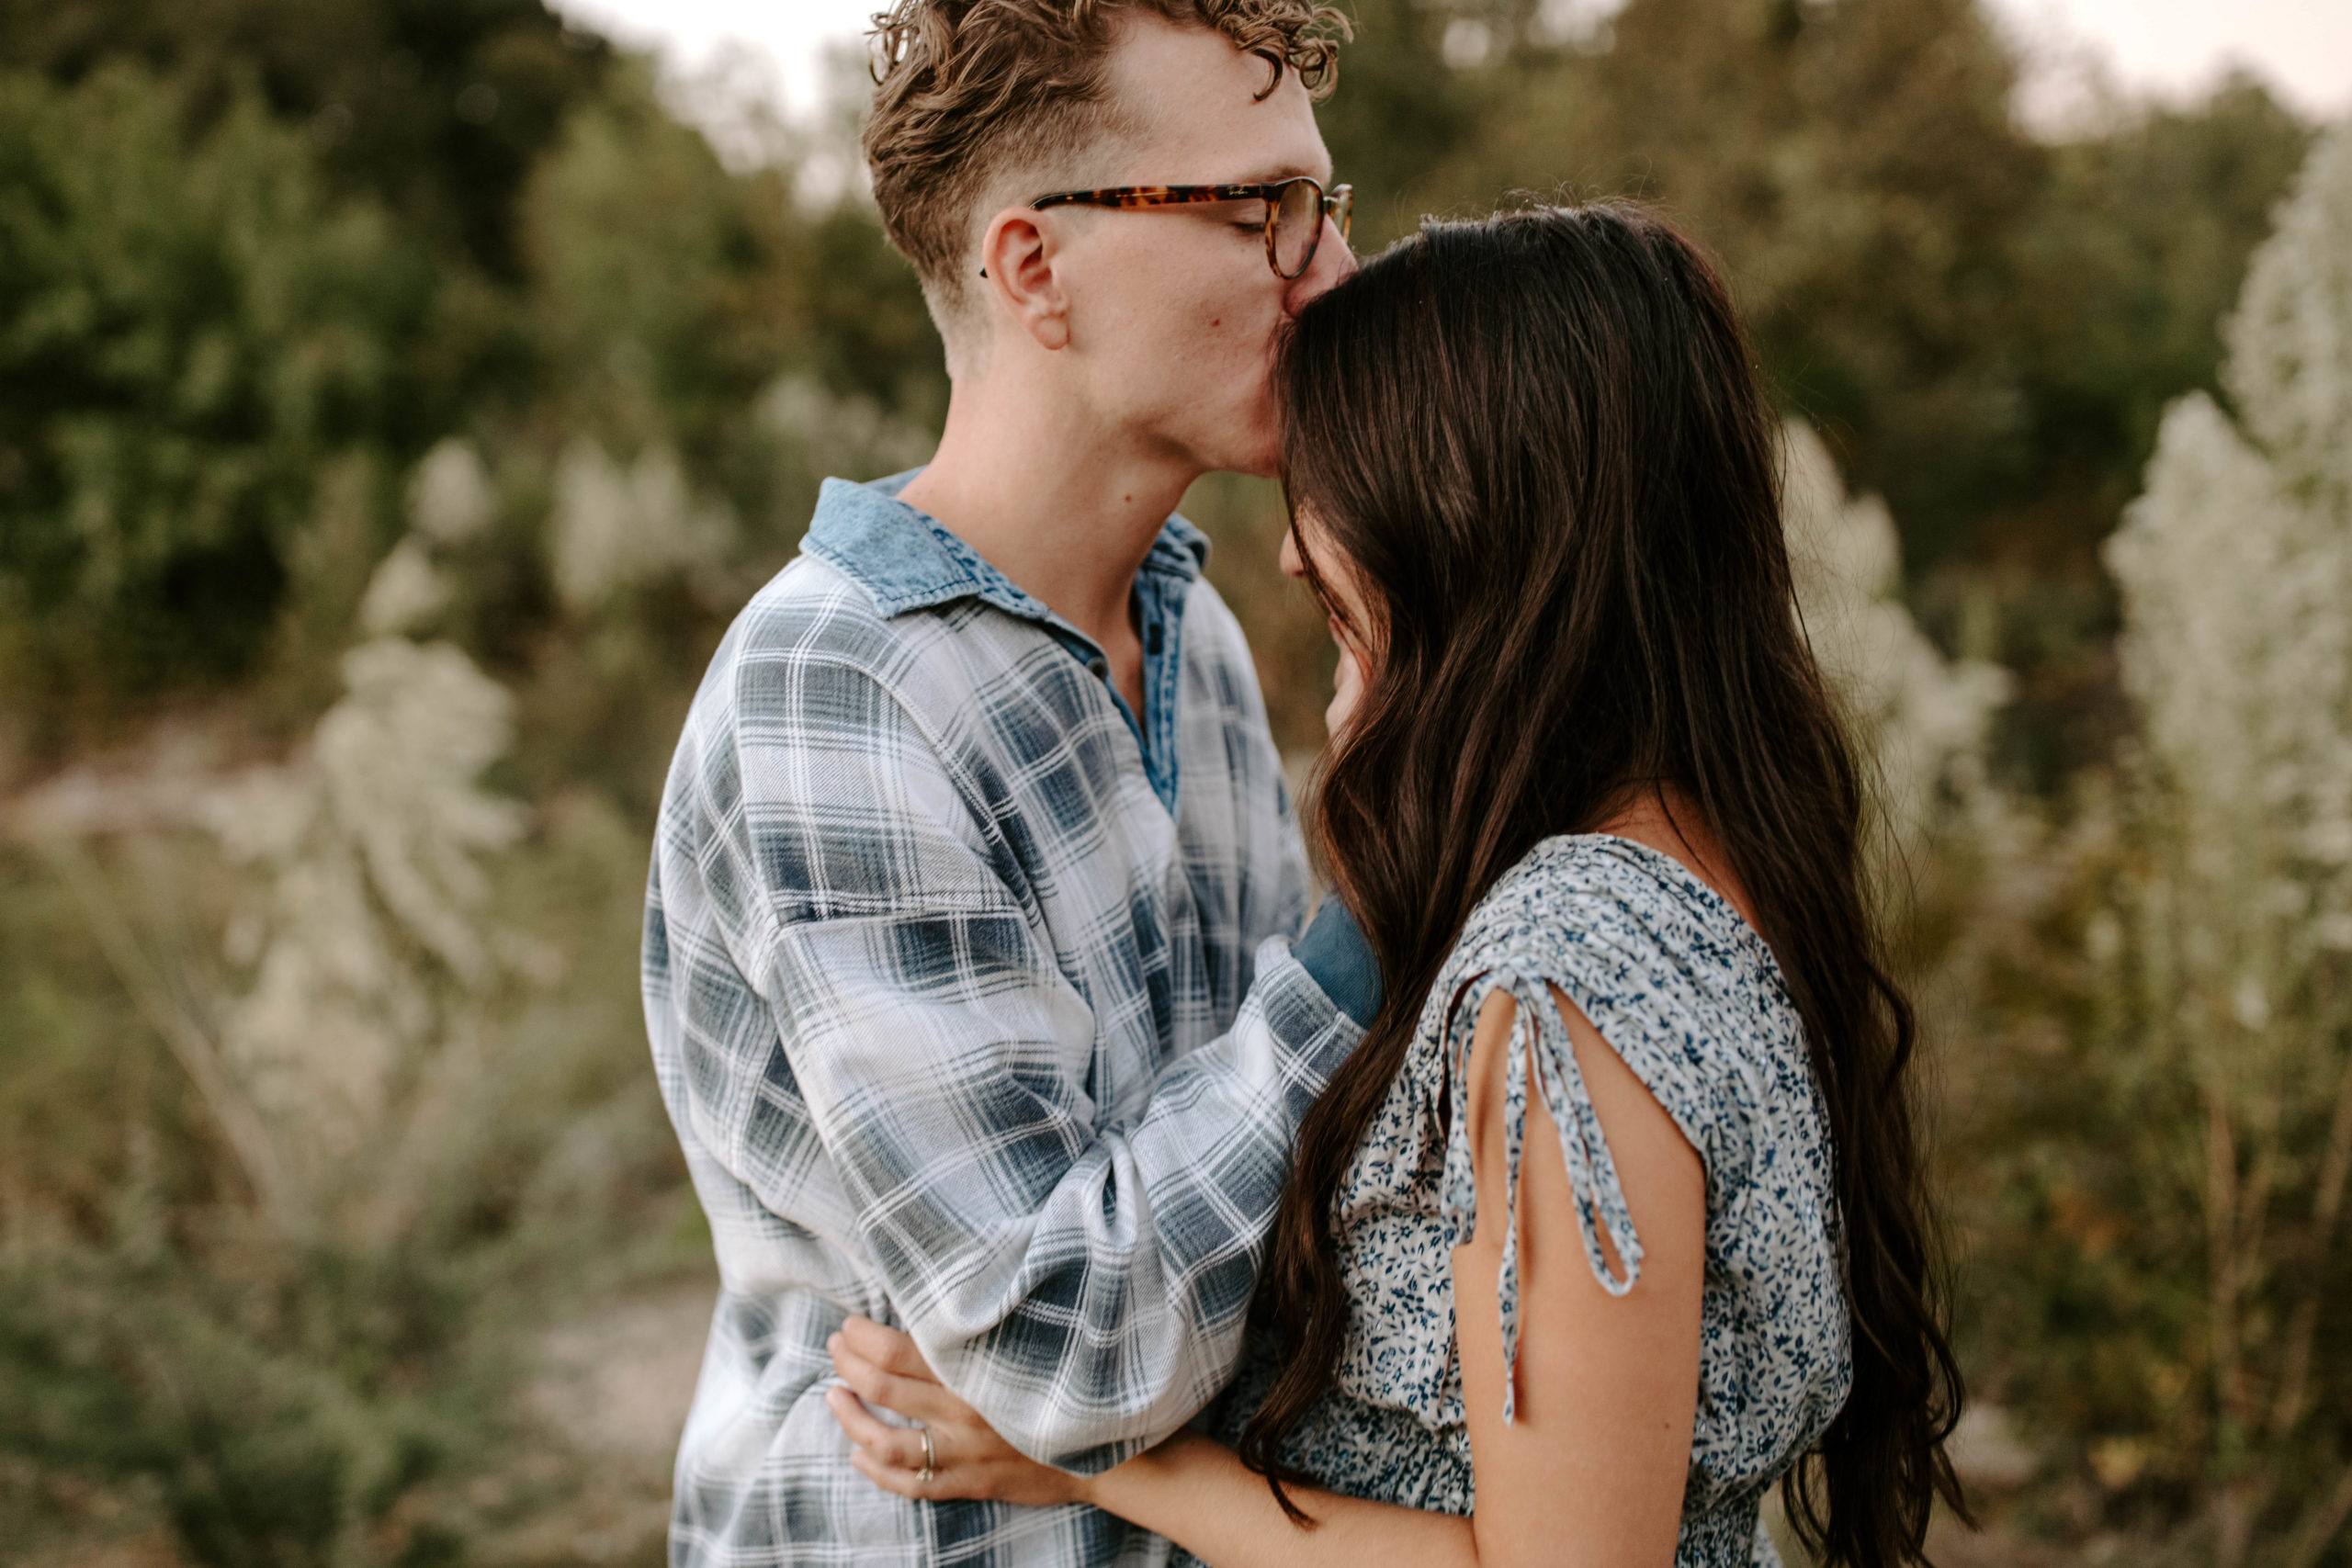 This dreamy couple session at Blue Hole Park in Georgetown, Texas is the perfect picture of natural moments. The photography by Sullivan Taylor are true to color, while still being warm & moody. We love seeing two people candidly in love! Looking for a wedding and elopement photographer who goes all over Texas? If you want timeless images that are true to color and warm, contact Sulli Taylor.